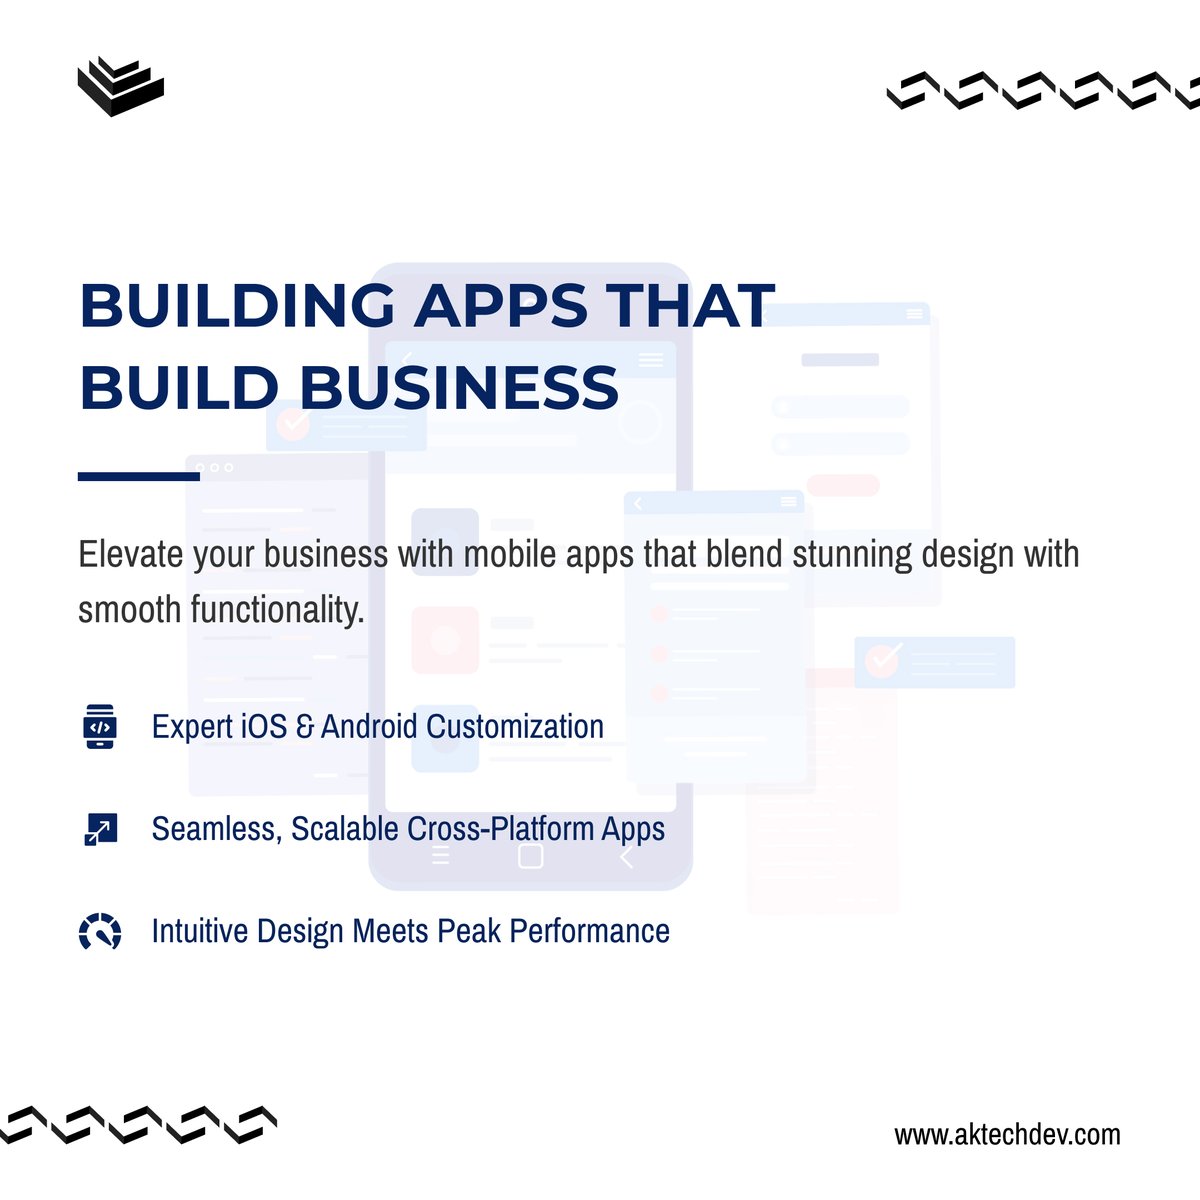 Grow your business with apps that deliver. Our cross-platform solutions merge intuitive design with peak performance.

#DigitalInnovation #AppDevelopment #MobileExcellence #BusinessTech #iOSAndroid #UserExperience #PerformanceDriven